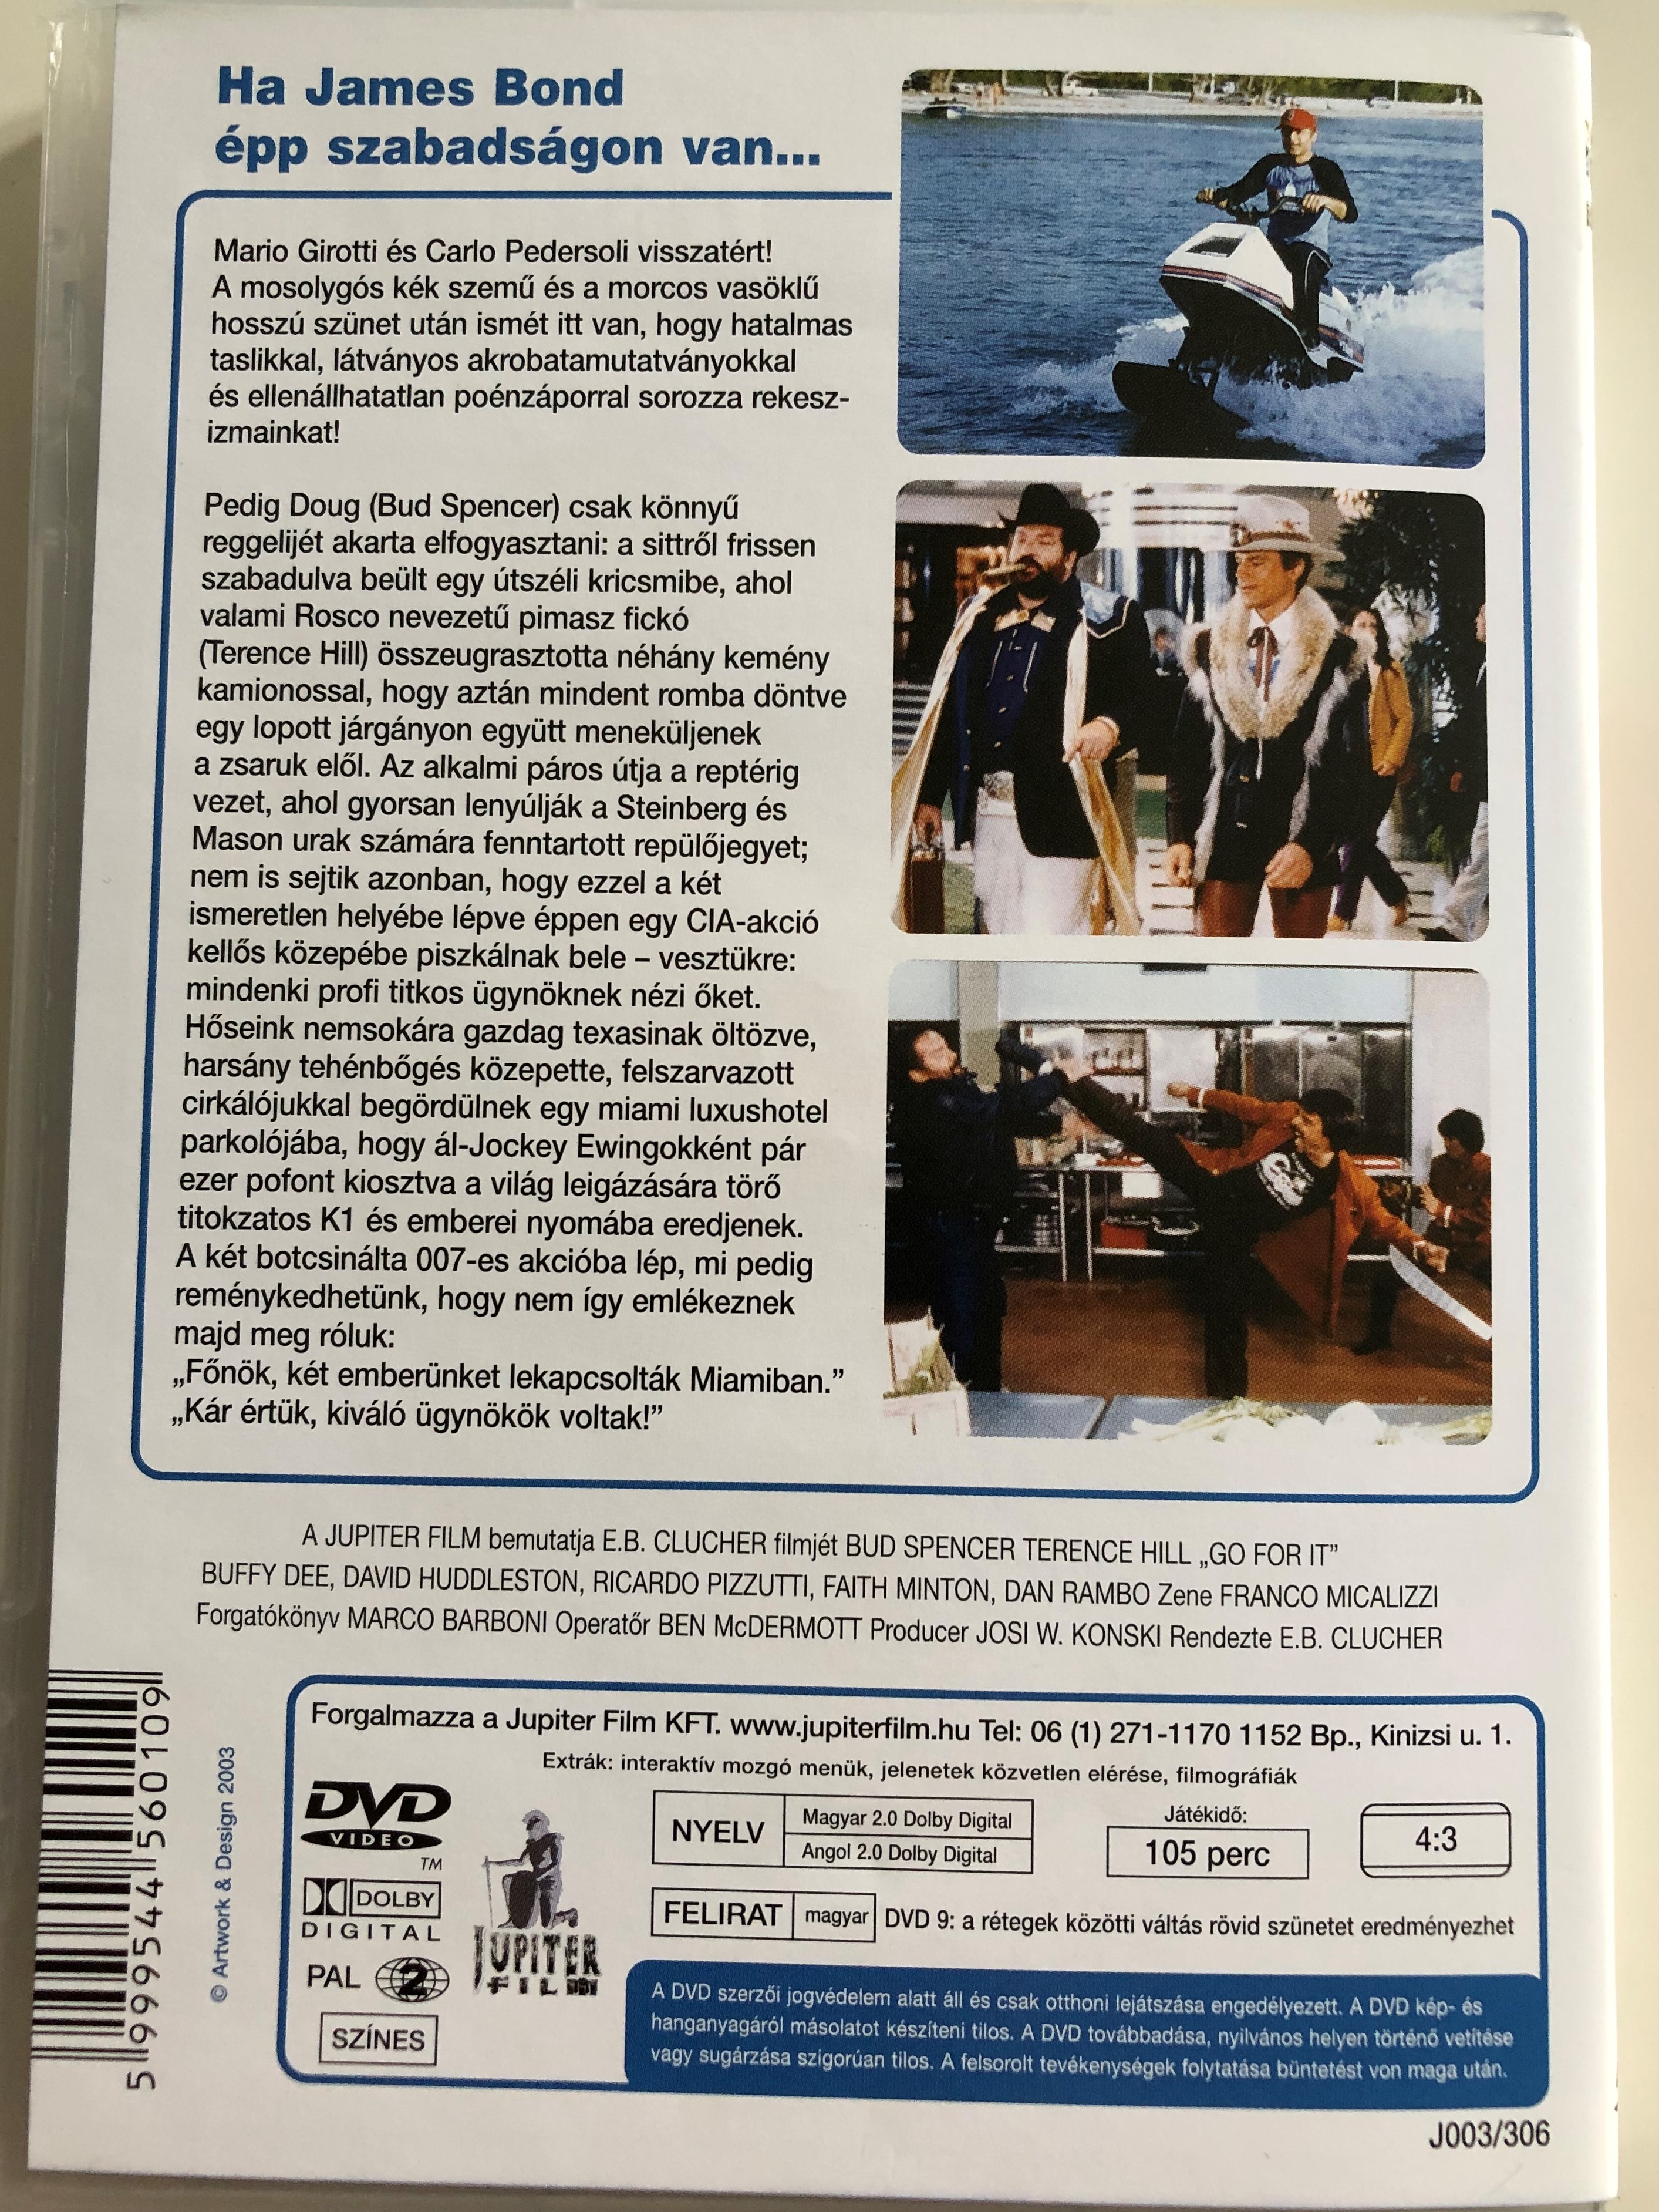 go-for-it-dvd-1983-nyom-s-ut-na-nati-con-la-camicia-directed-by-enzo-barboni-starring-bud-spencer-terence-hill-buffy-dee-2-.jpg